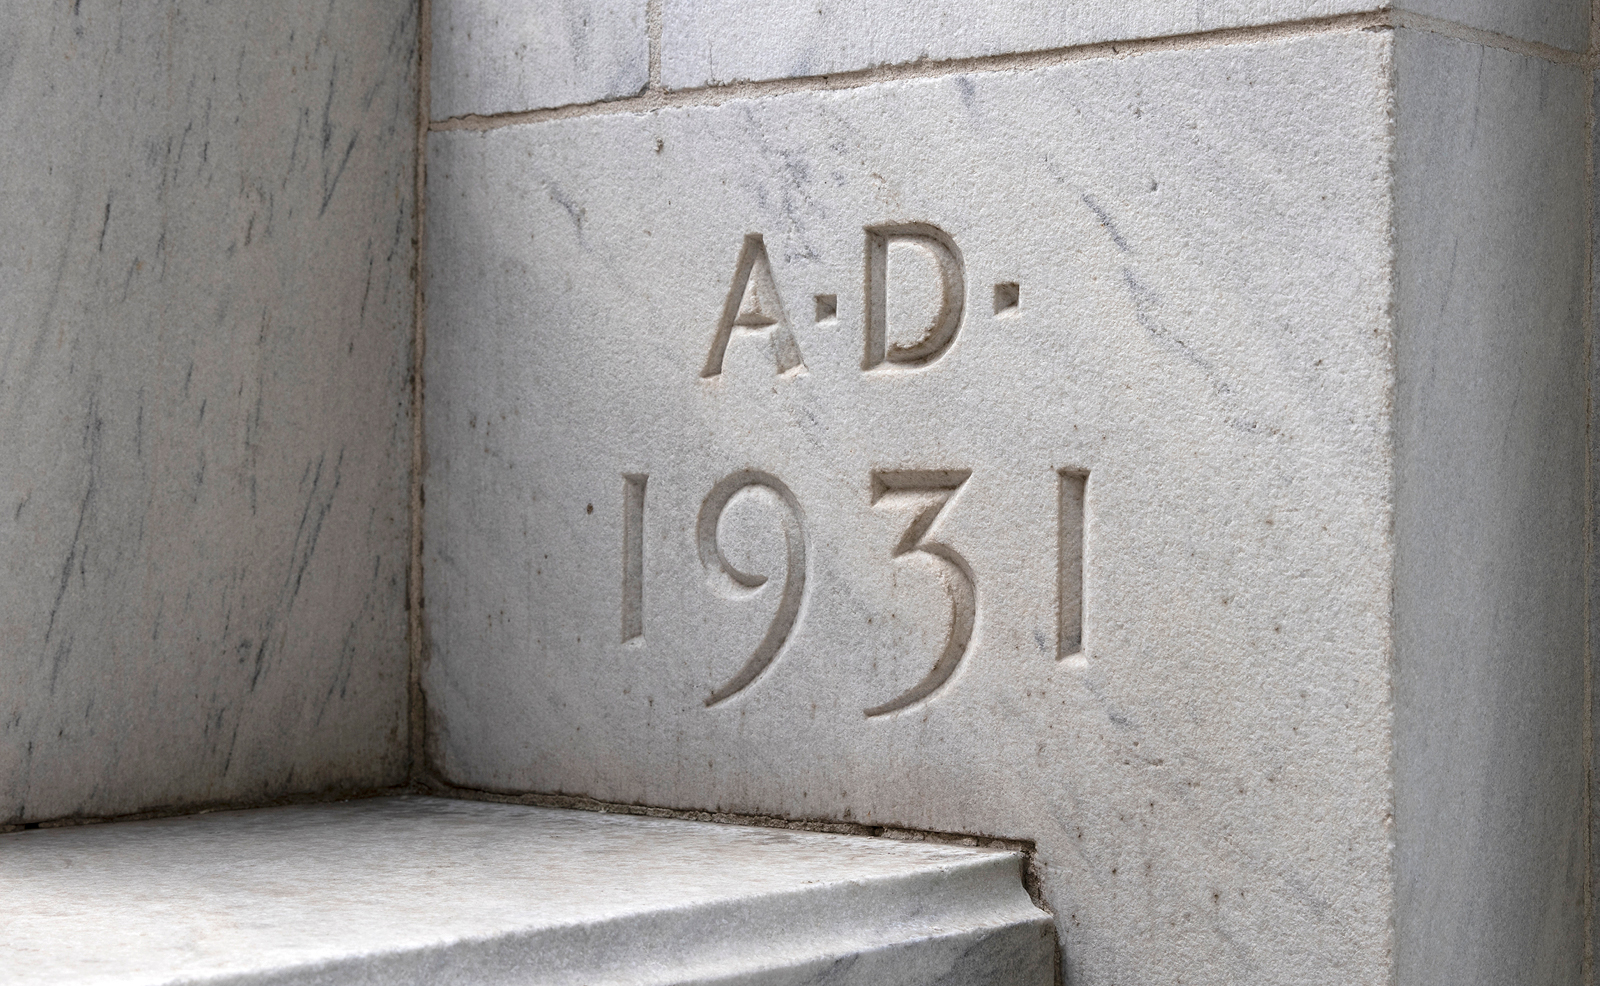 Image of the cornerstone of the Thomas J. Moyer Ohio Judicial Center with 'A.D. 1931' carved on it